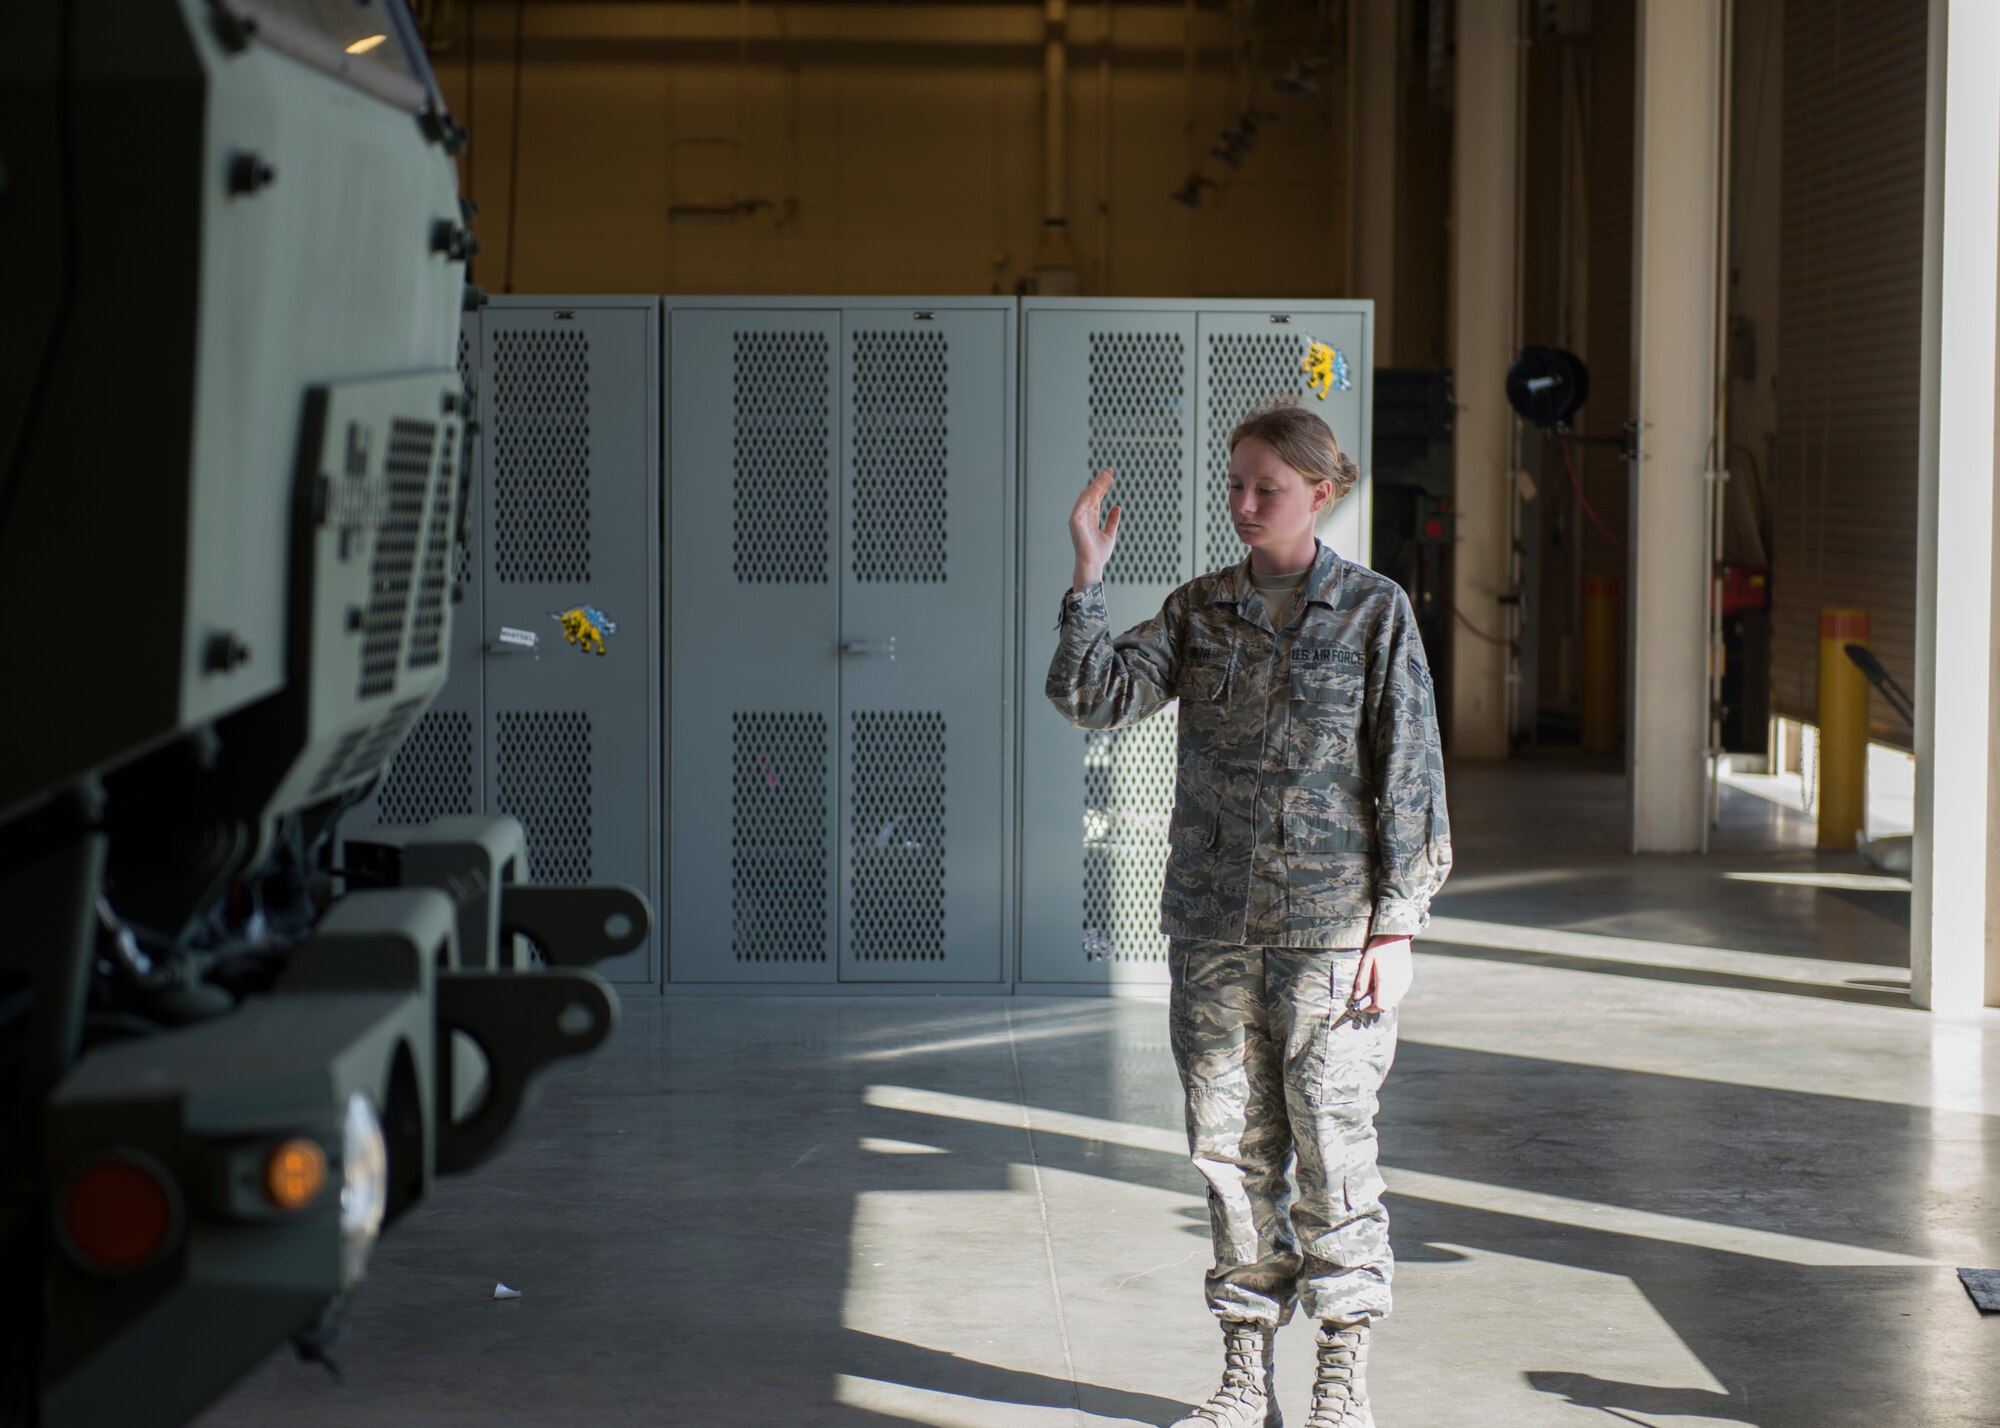 Airman Alexis Smith, 726th Air Control Squadron, guides a Medium Tactical Vehicle onto weight scales to conduct a weight inspection July 11, 2019, at Mountain Home Air Force Base Idaho. The 726th ACS conducts weight inspections in order to ensure the vehicle adheres to weight standards. (U.S. Air Force photo by Senior Airman Tyrell Hall)